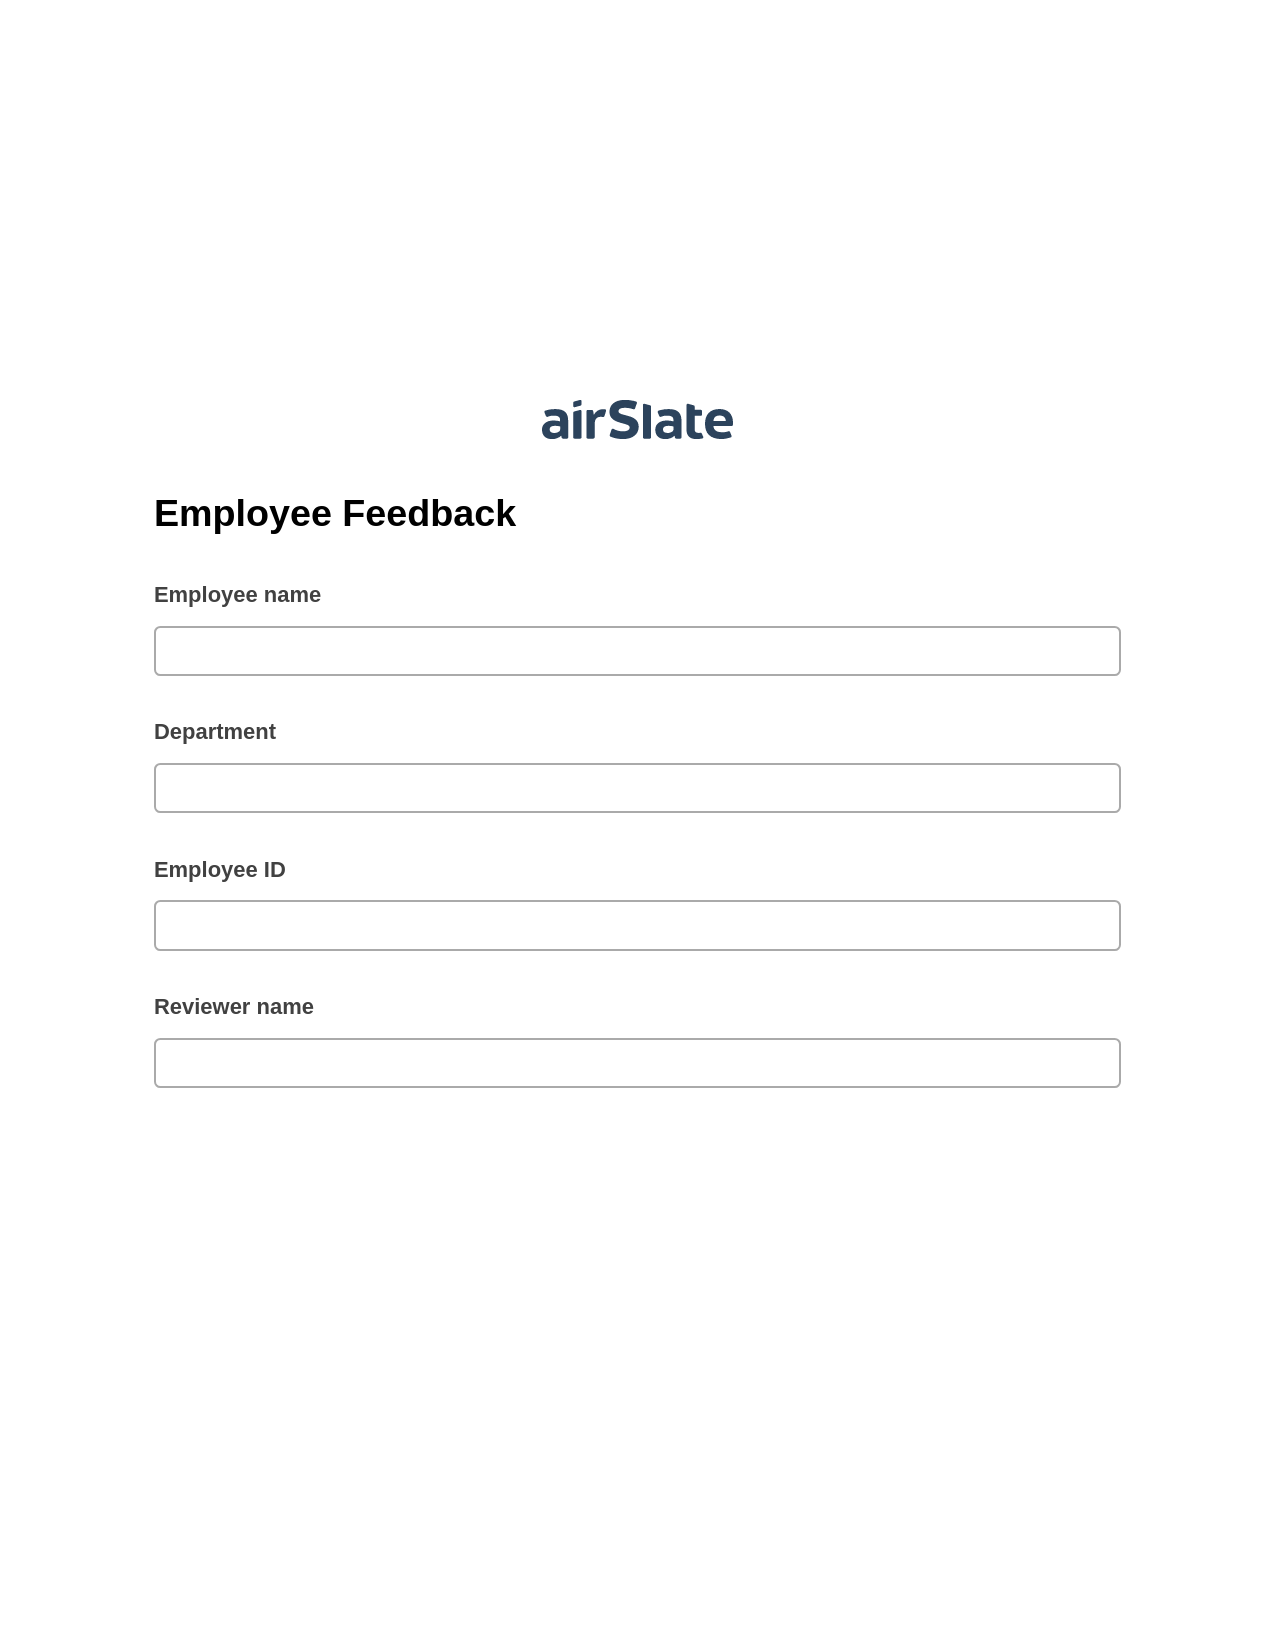 Employee Feedback Pre-fill from Google Sheet Dropdown Options Bot, Send a Slate with Roles Bot, Email Notification Postfinish Bot